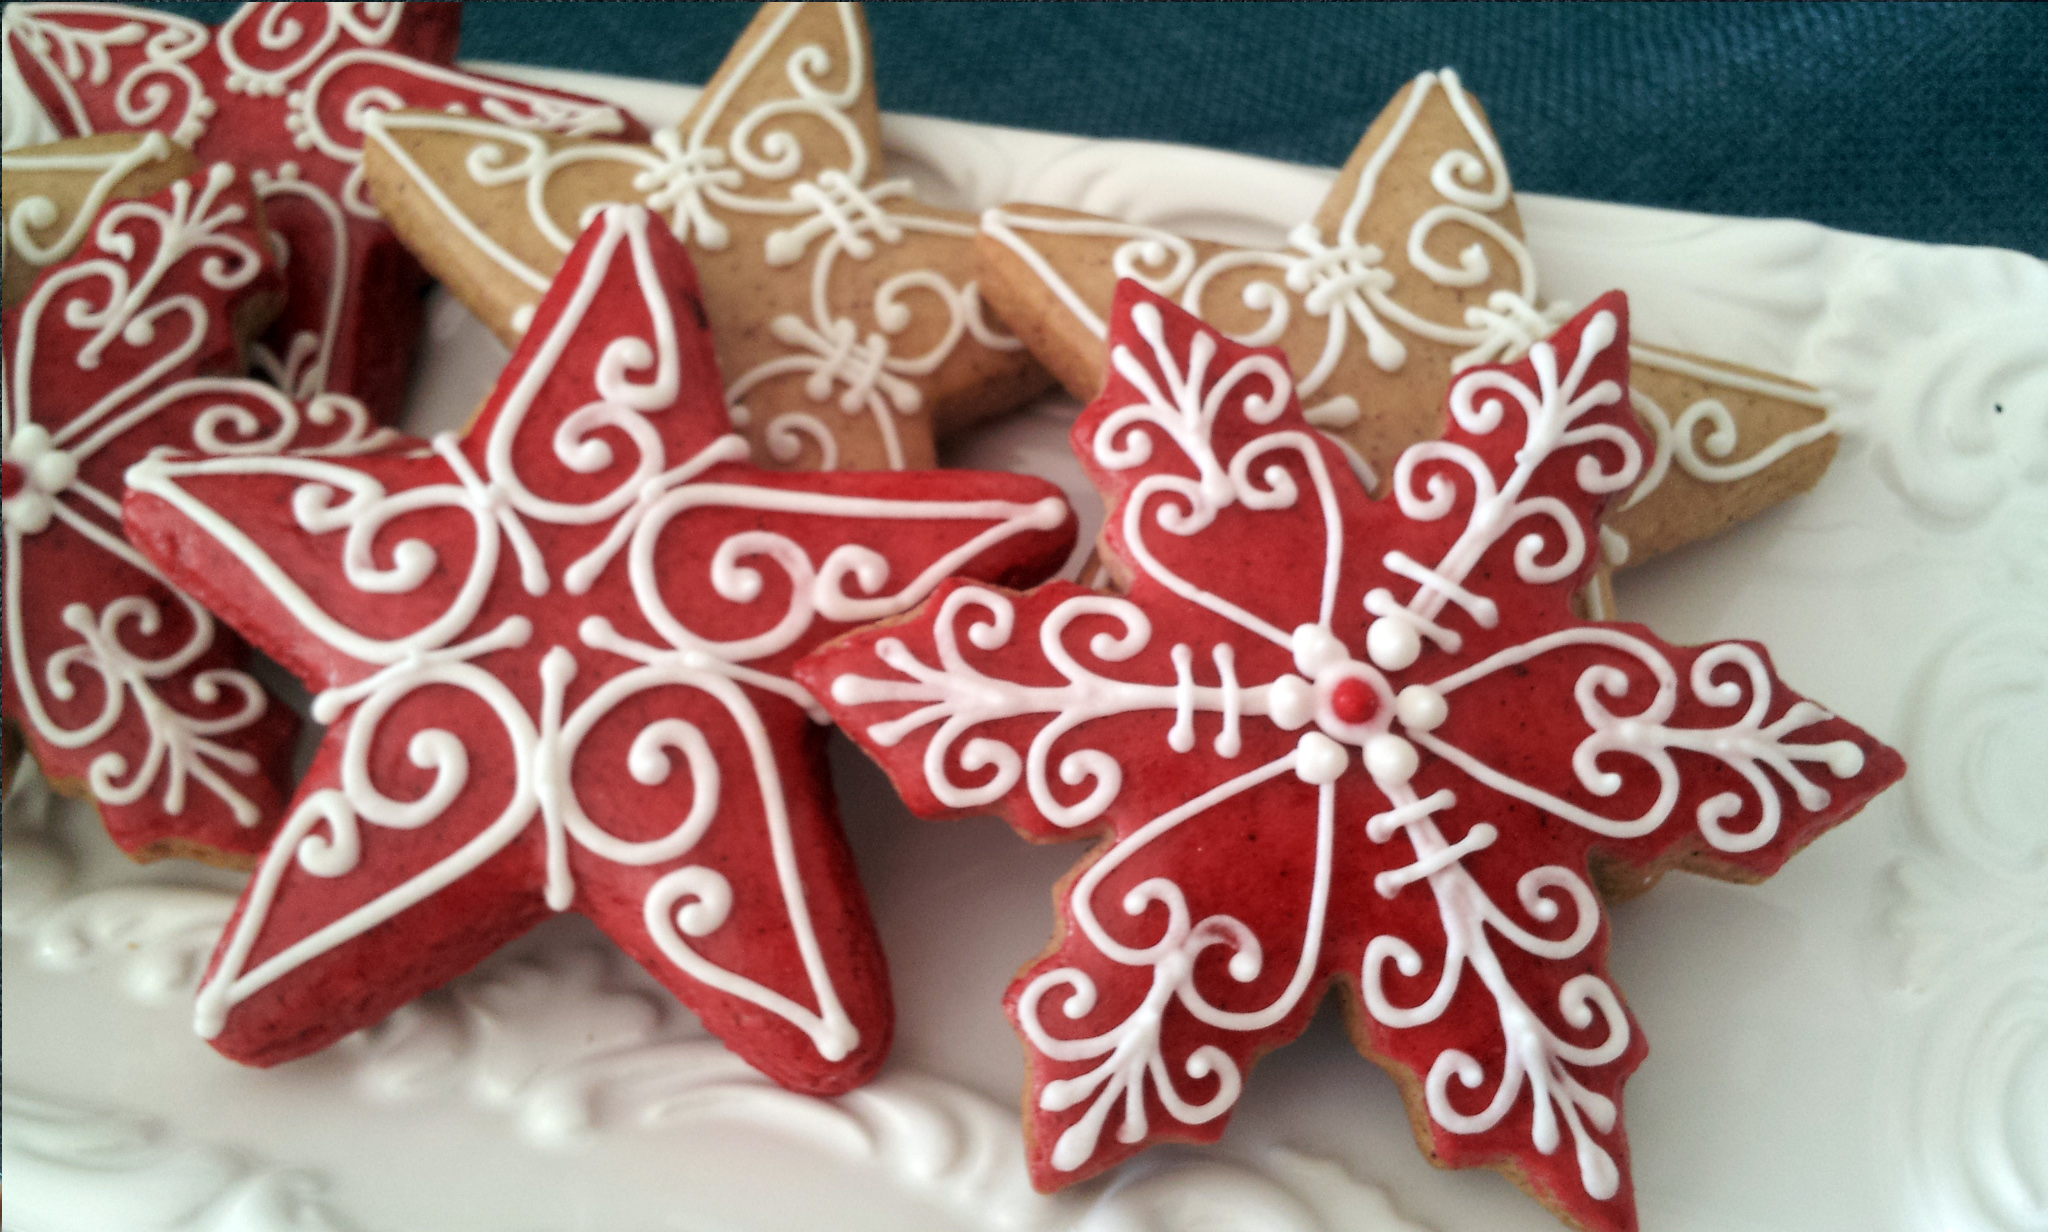 The red color on gingerbread